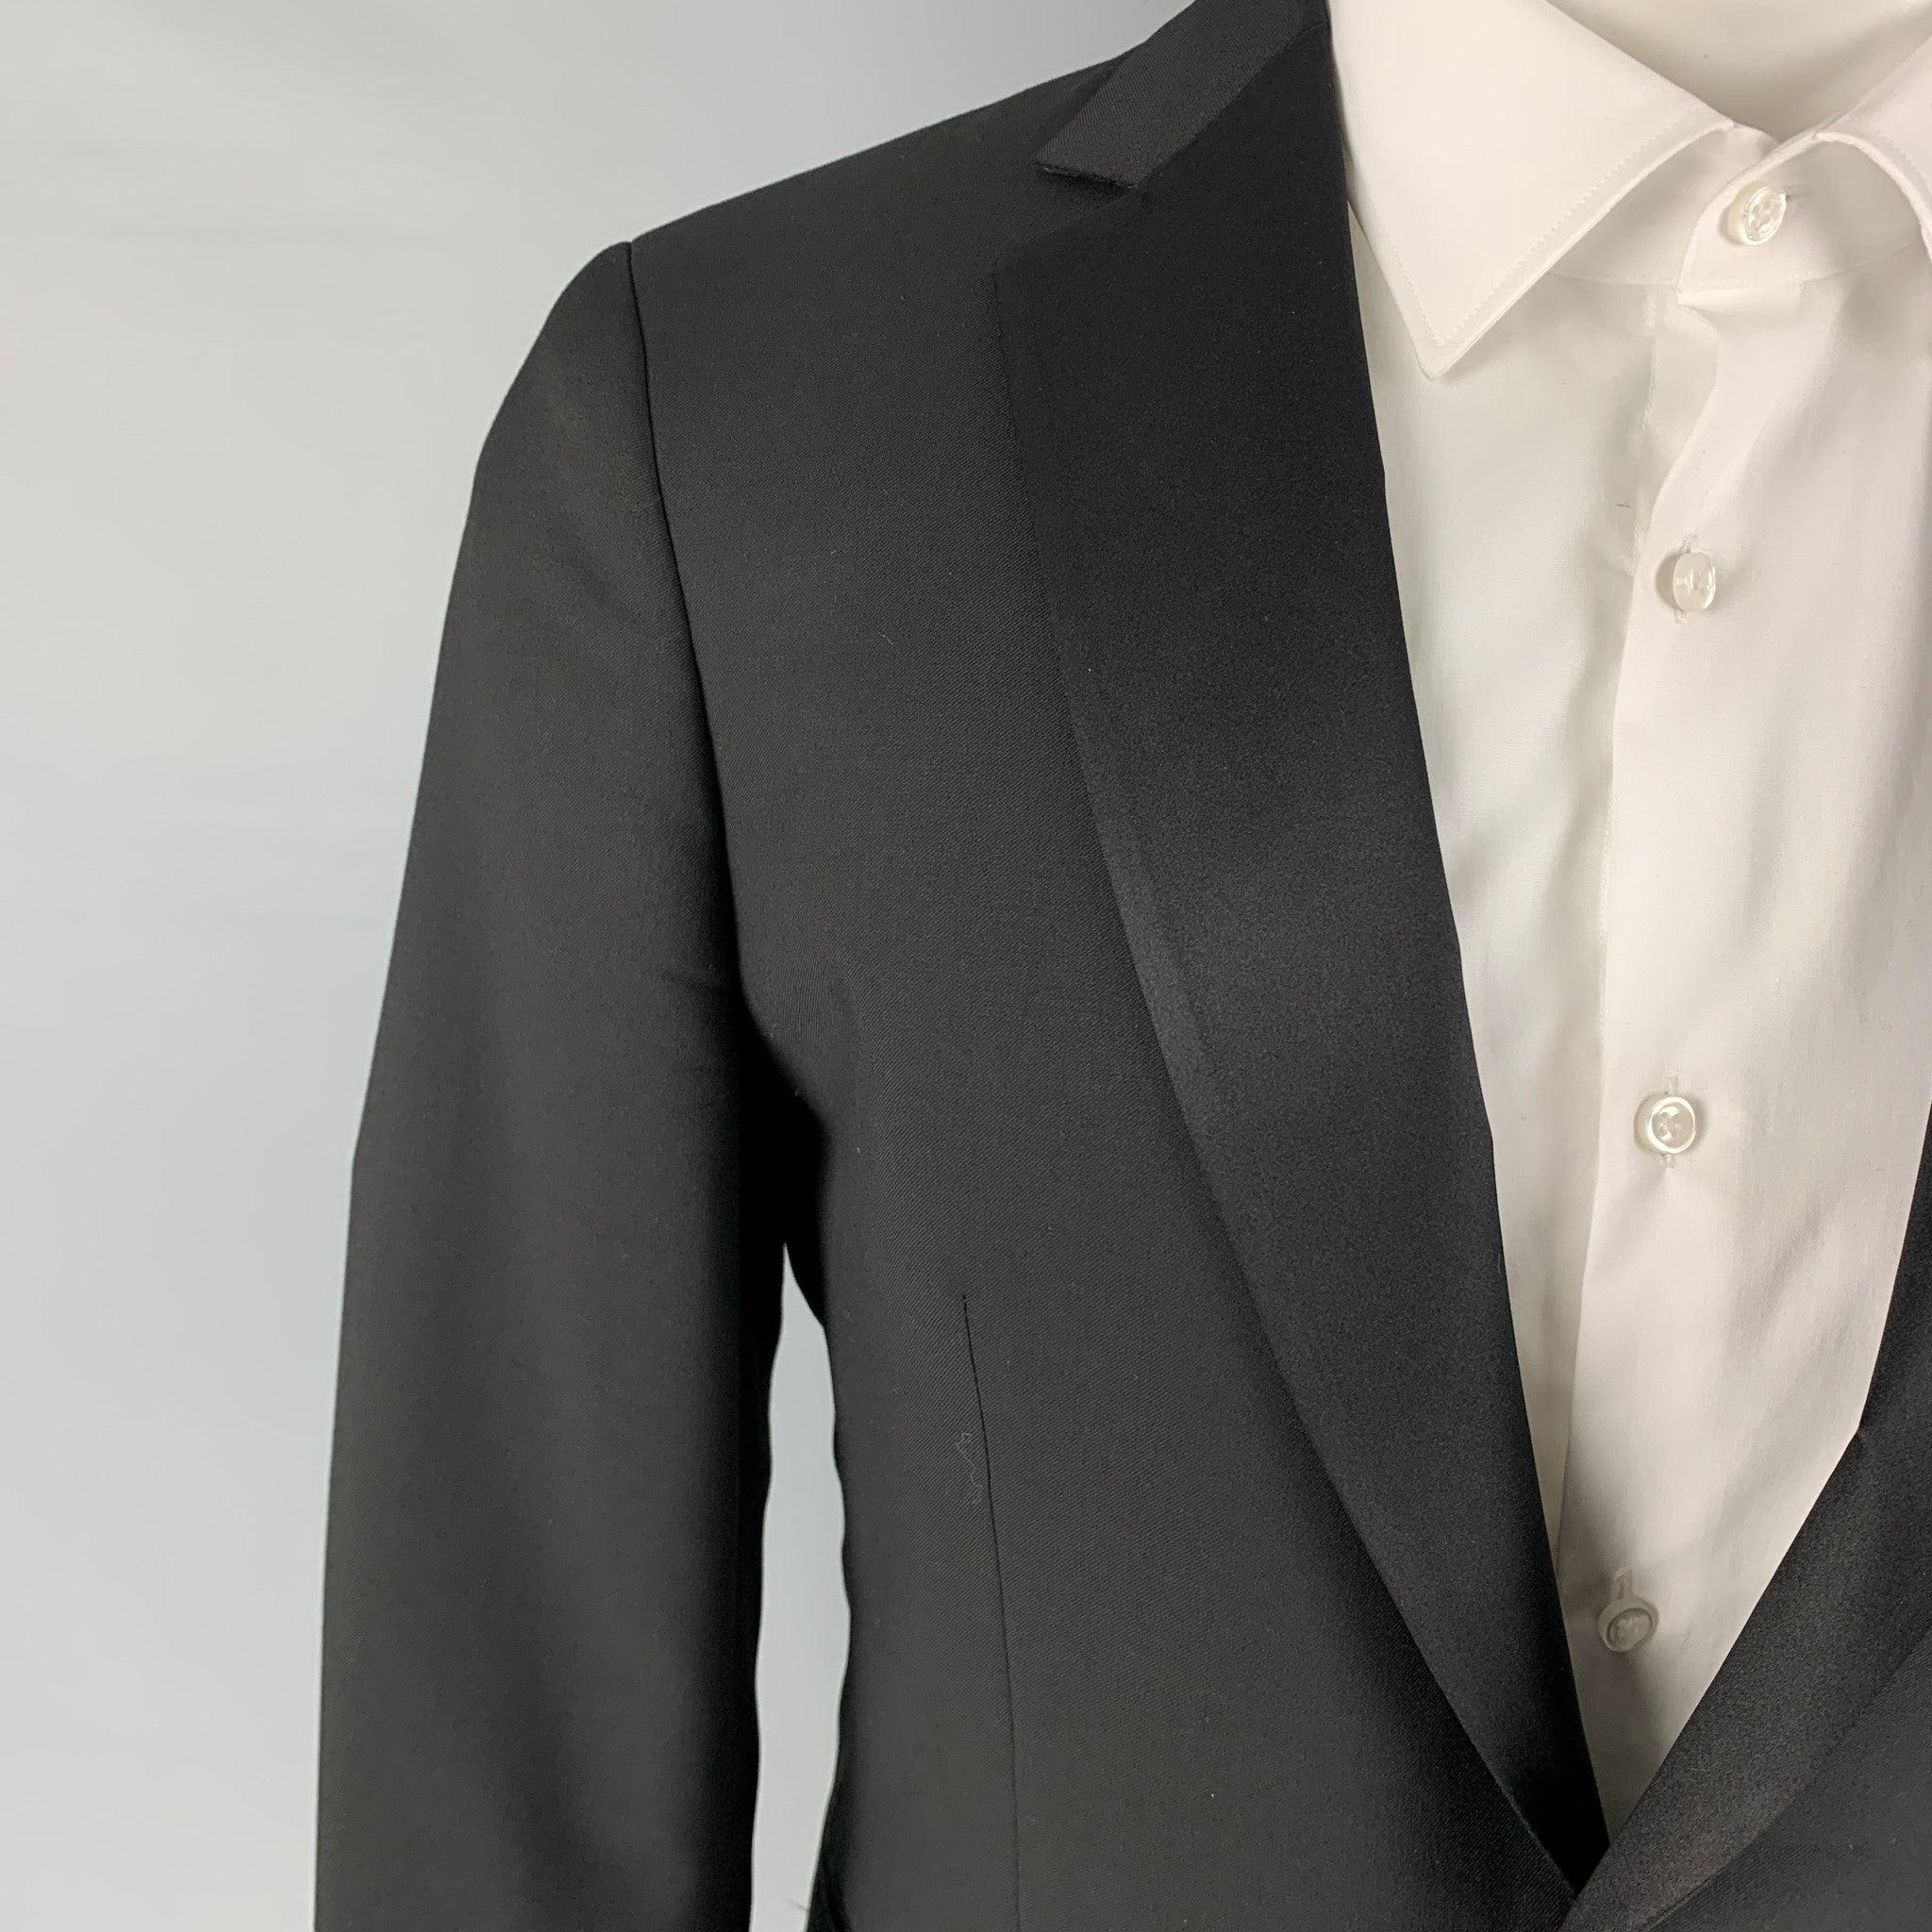 JOHN VARVATOS tuxedo sport coat comes in a black wool with a full liner featuring a notch lapel, slit pockets, single back vent, and a single button closure.
Excellent
Pre-Owned Condition. 

Marked:   48 

Measurements: 
 
Shoulder: 17.5 inches